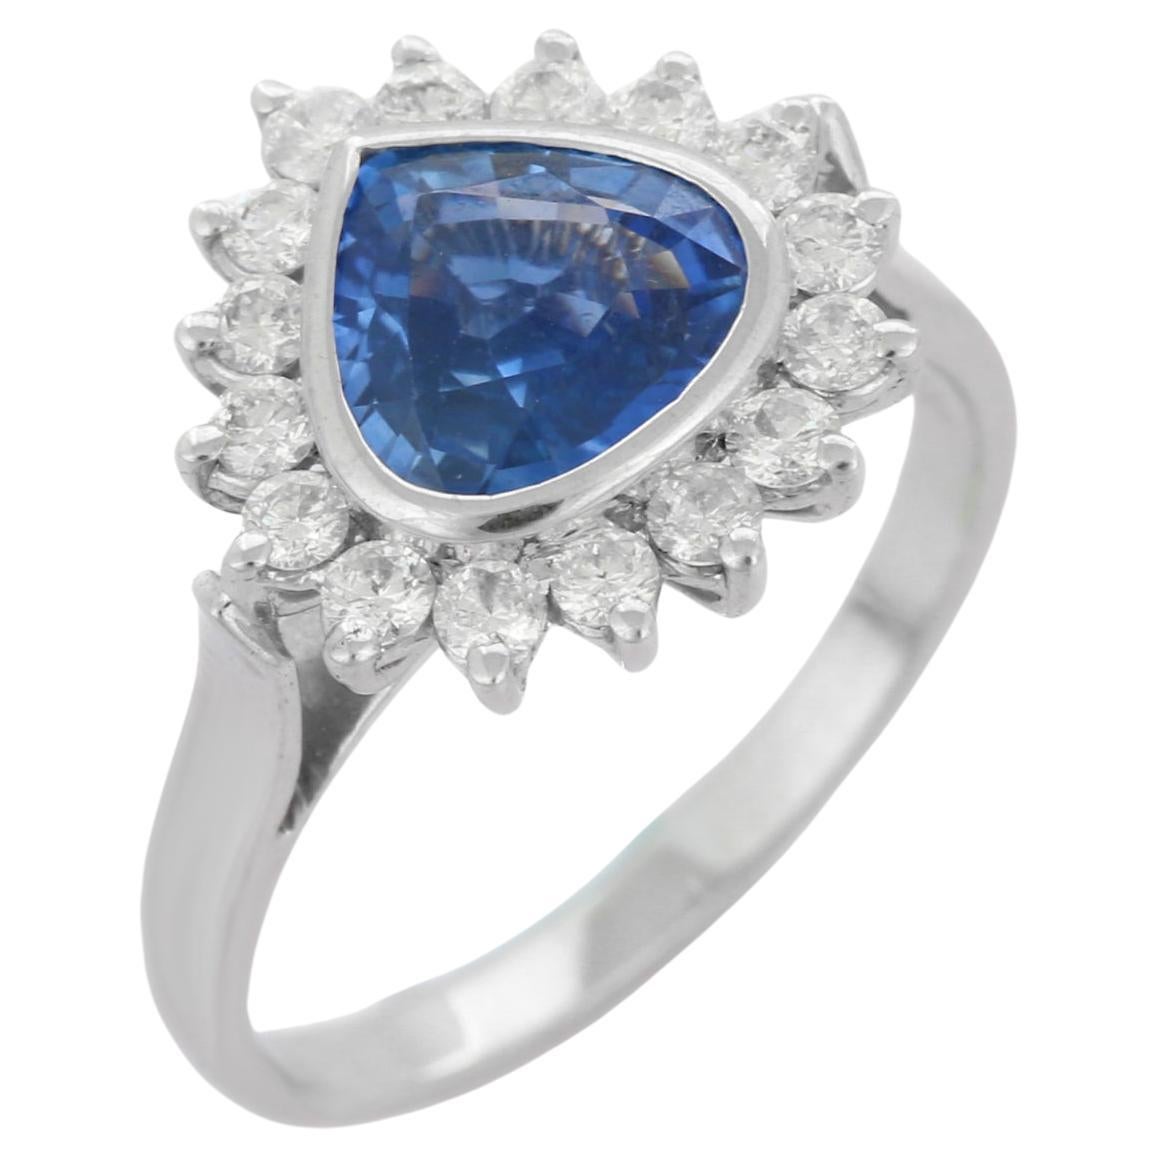 2.05 ct Blue Sapphire and Diamond Halo Engagement Ring in 18K White Gold